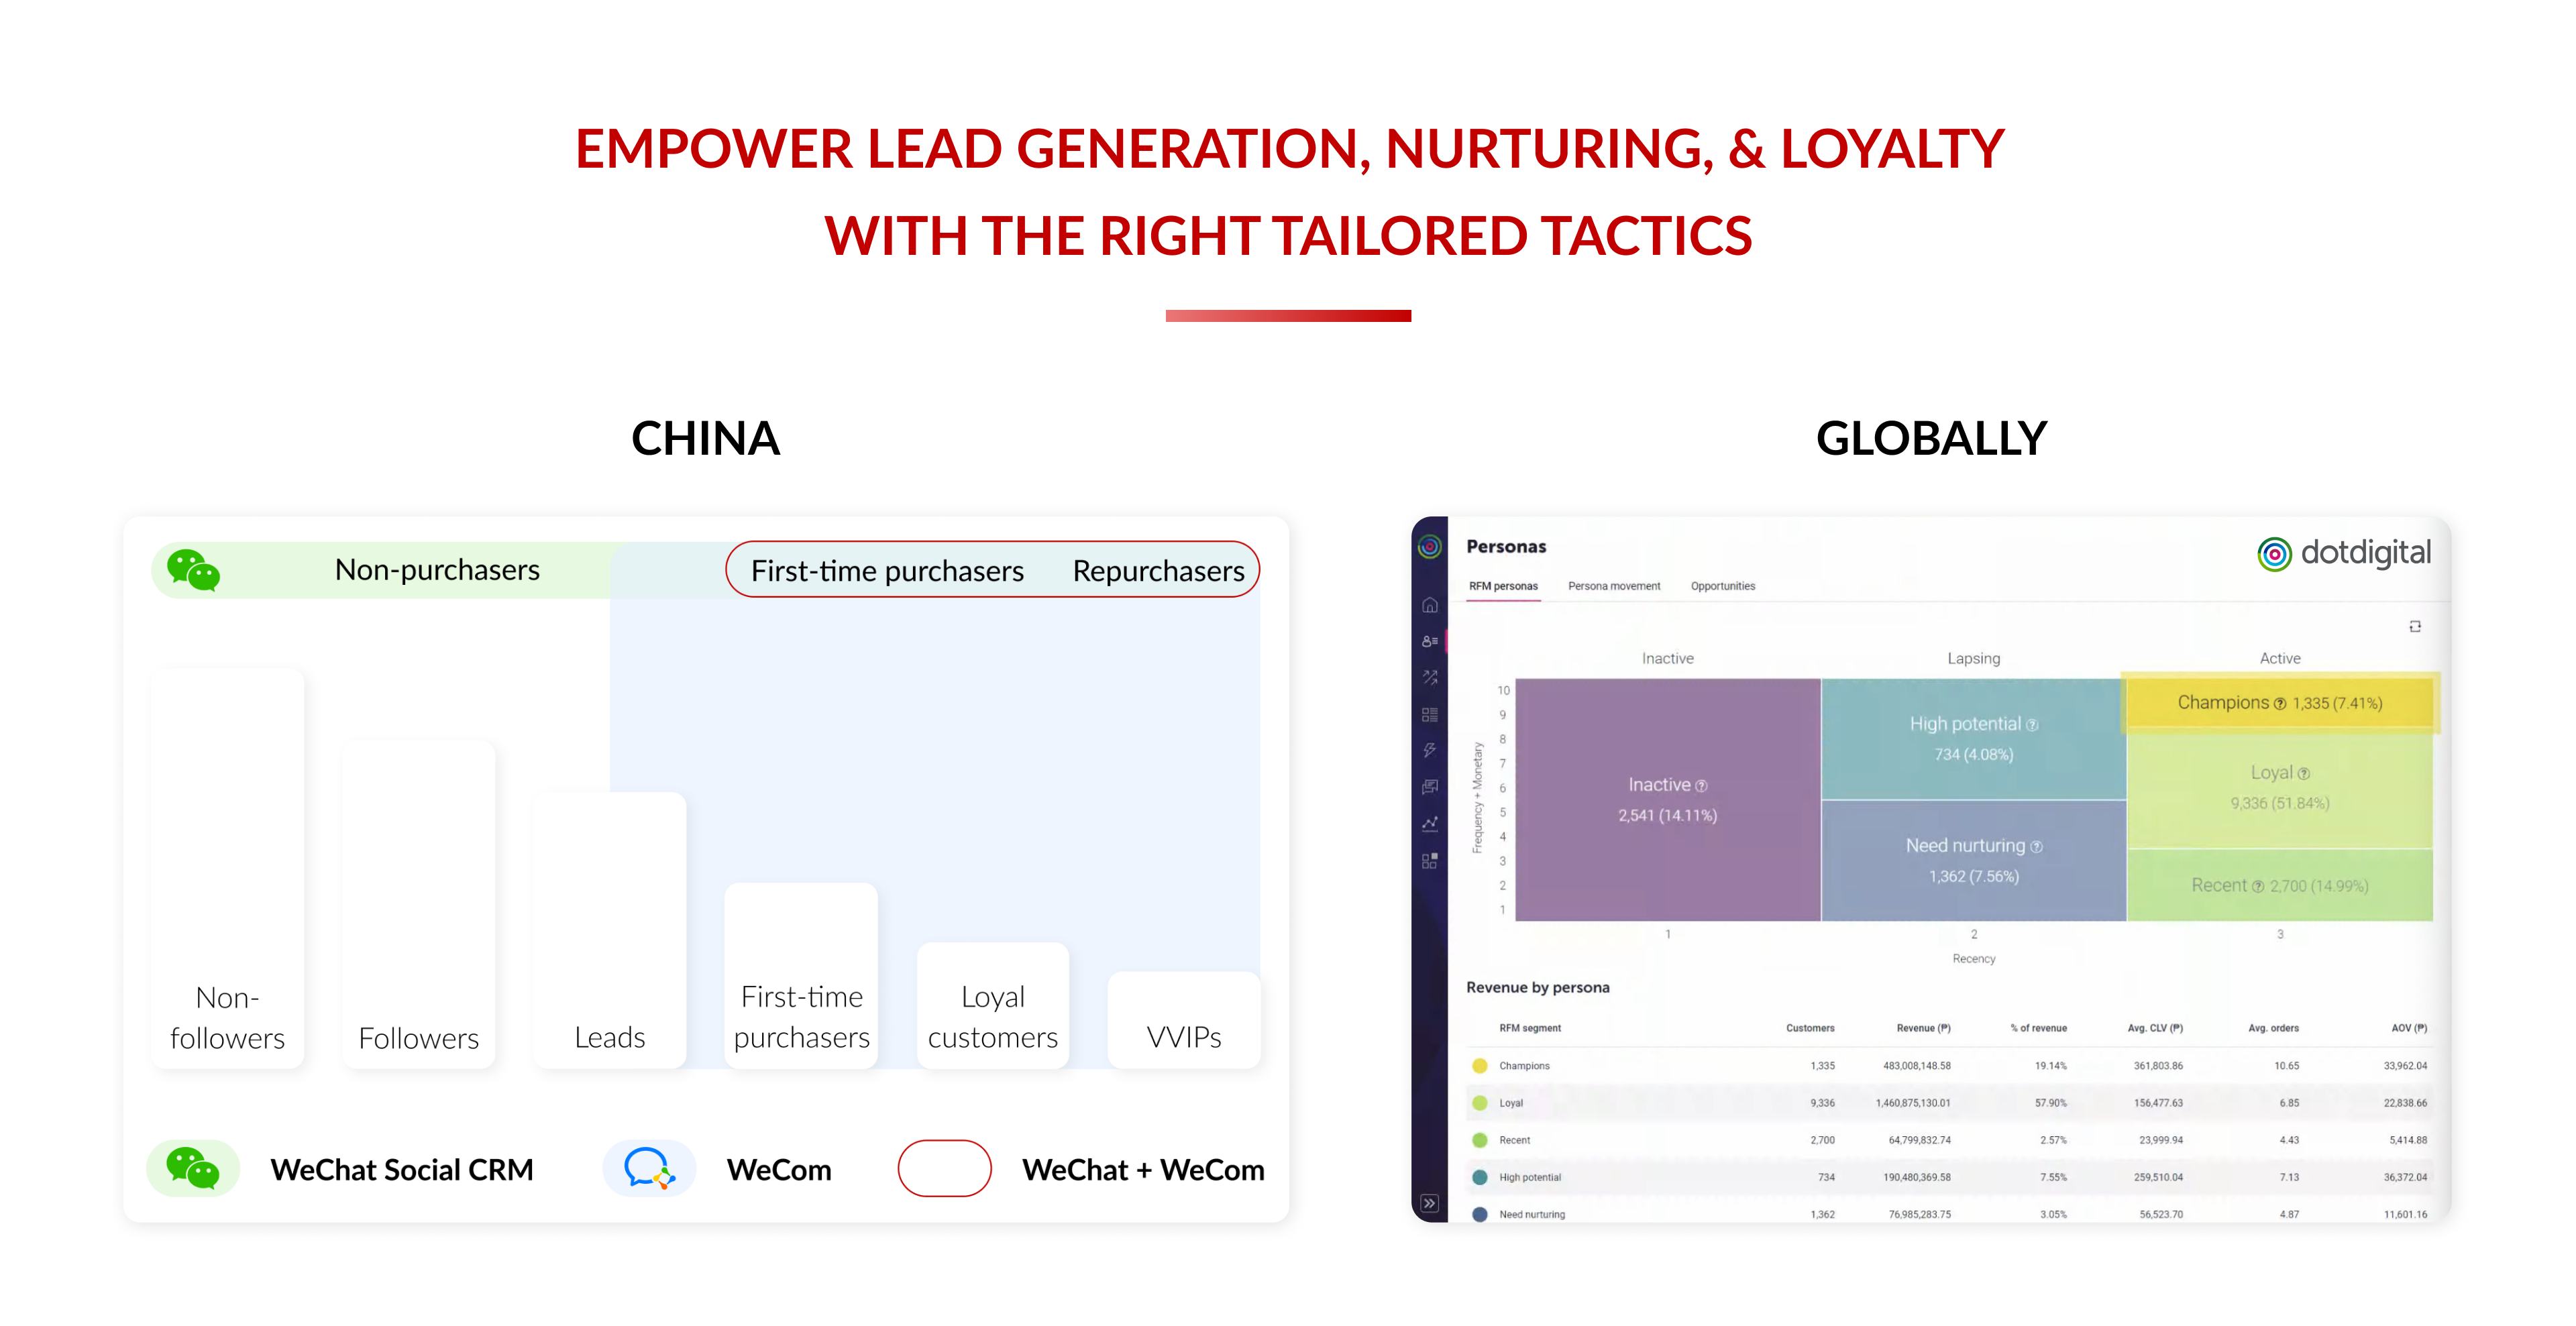 IT Consultis (ITC) can help you empower lead generation, nurturing, and loyalty with the right tailored tactics in China and globally